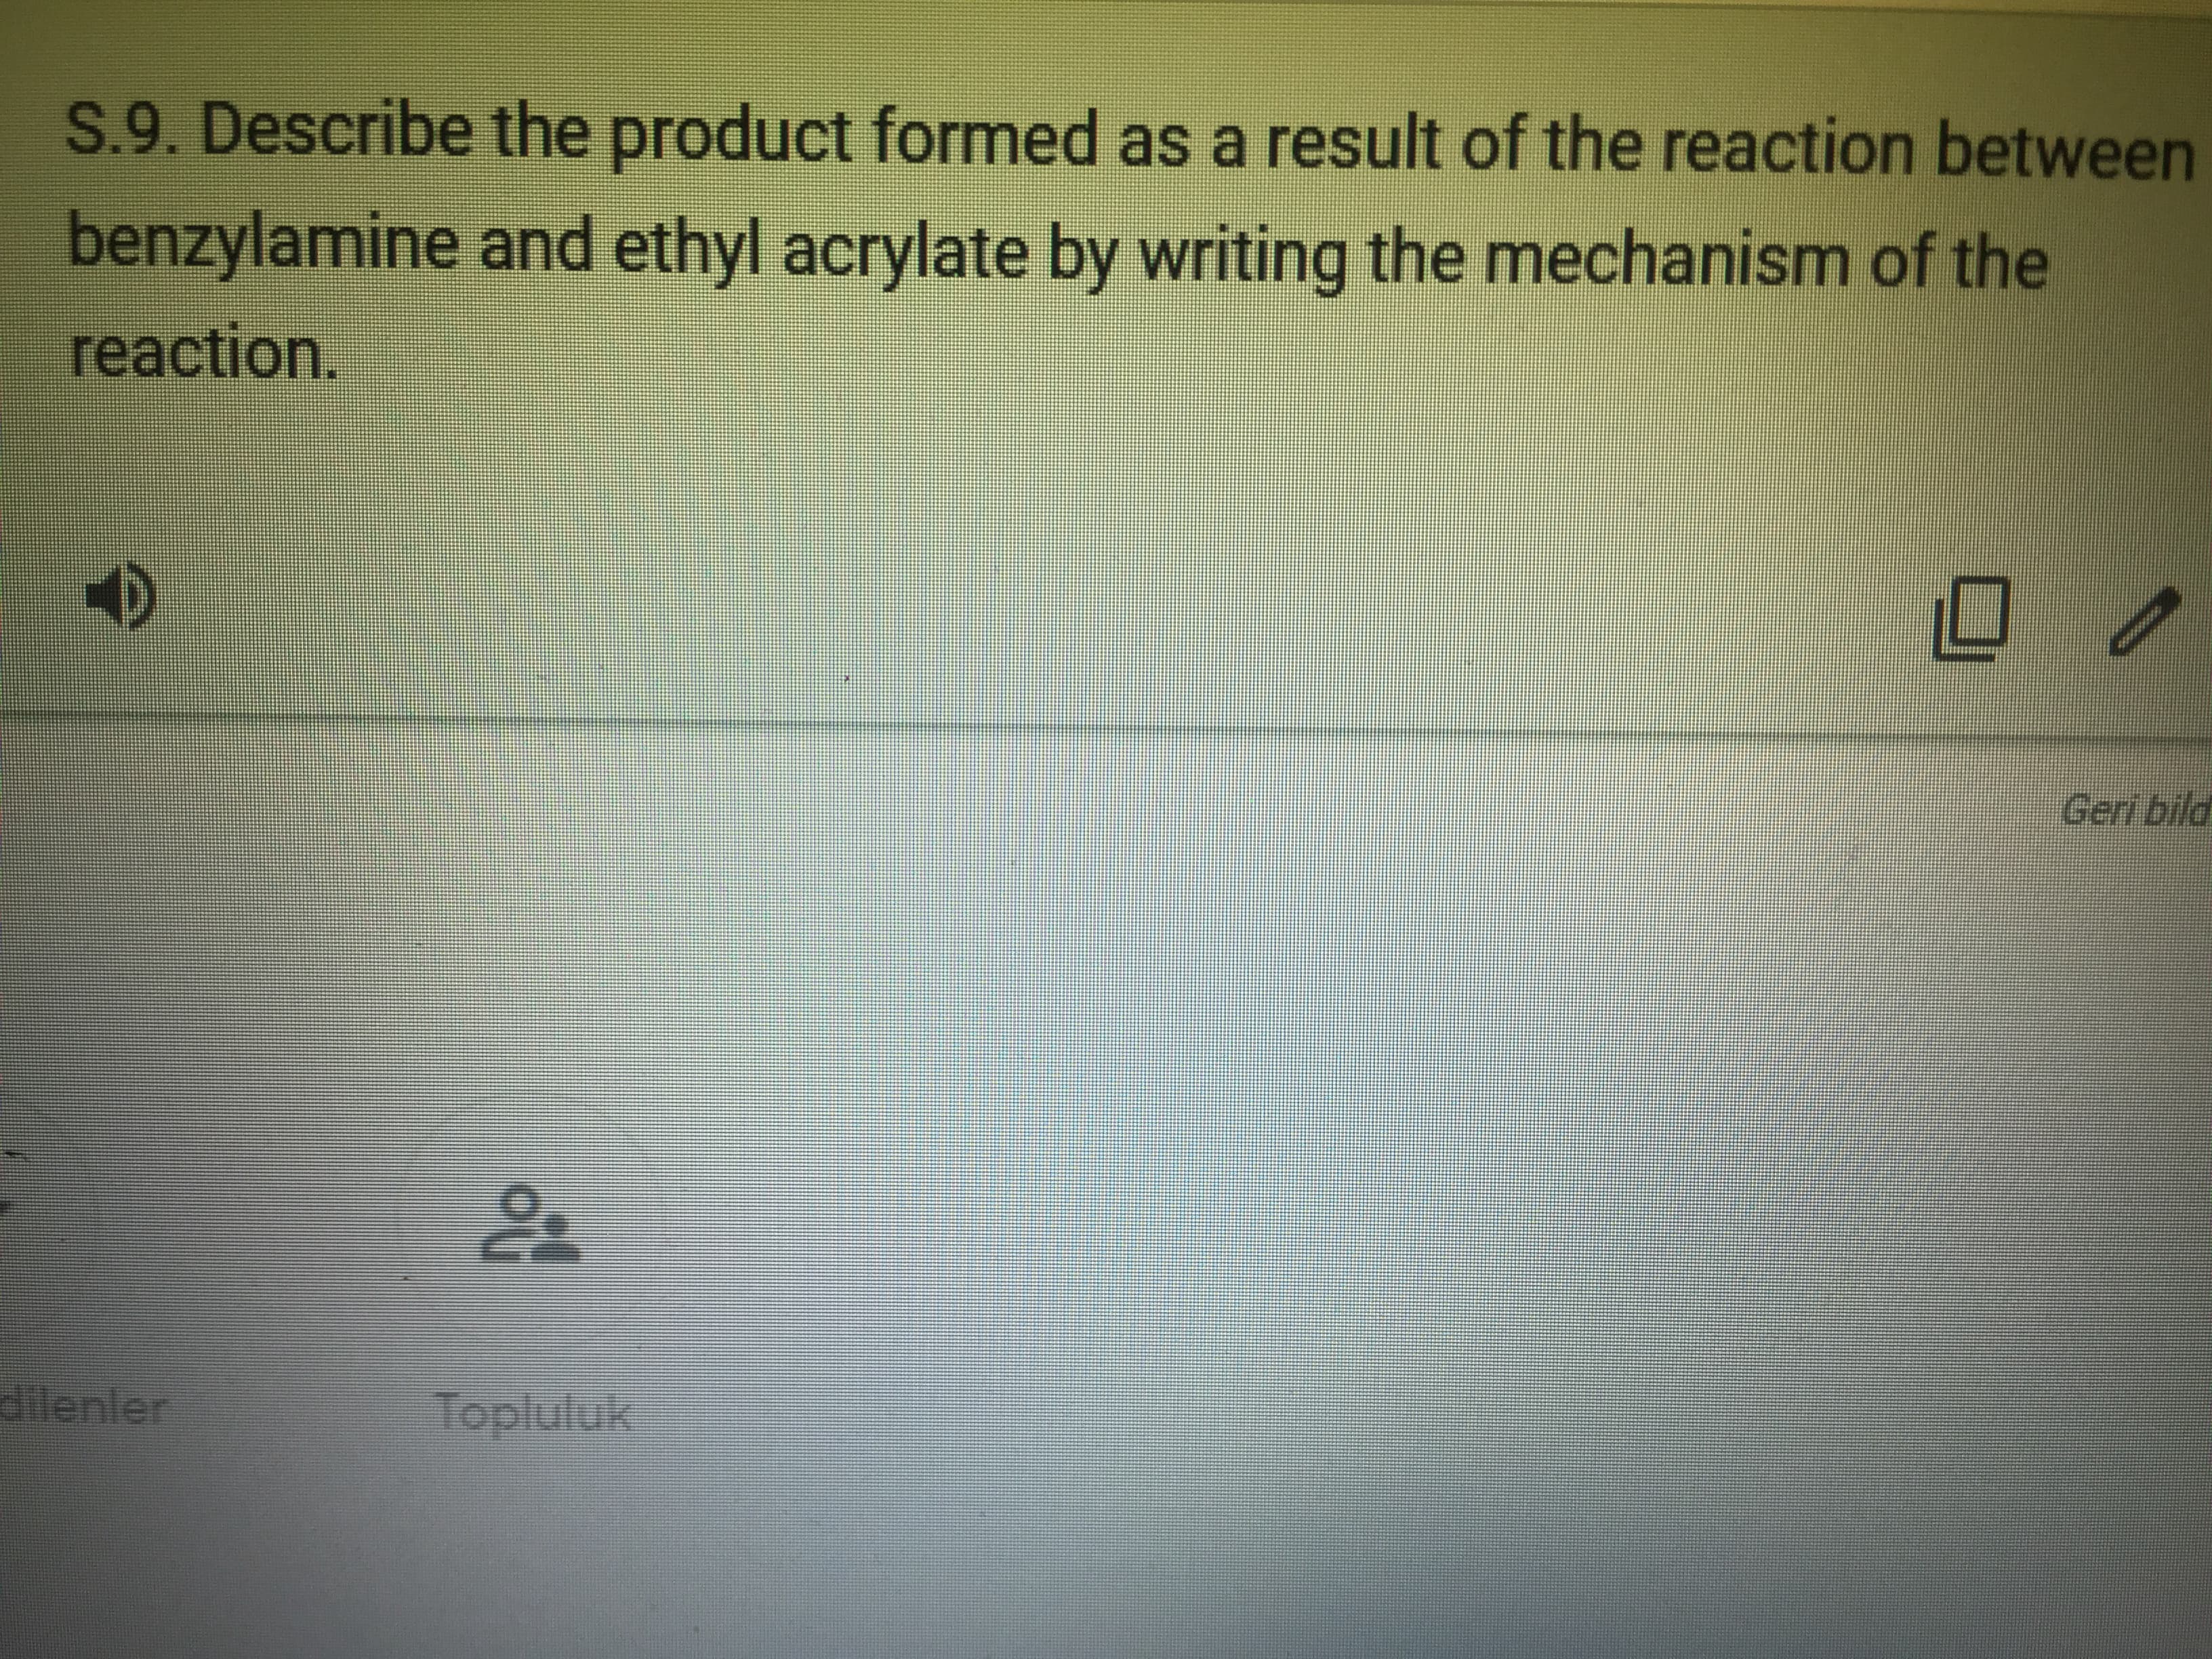 S.9. Describe the product formed as a result of the reaction between
benzylamine and ethyl acrylate by writing the mechanism of the
reaction.
